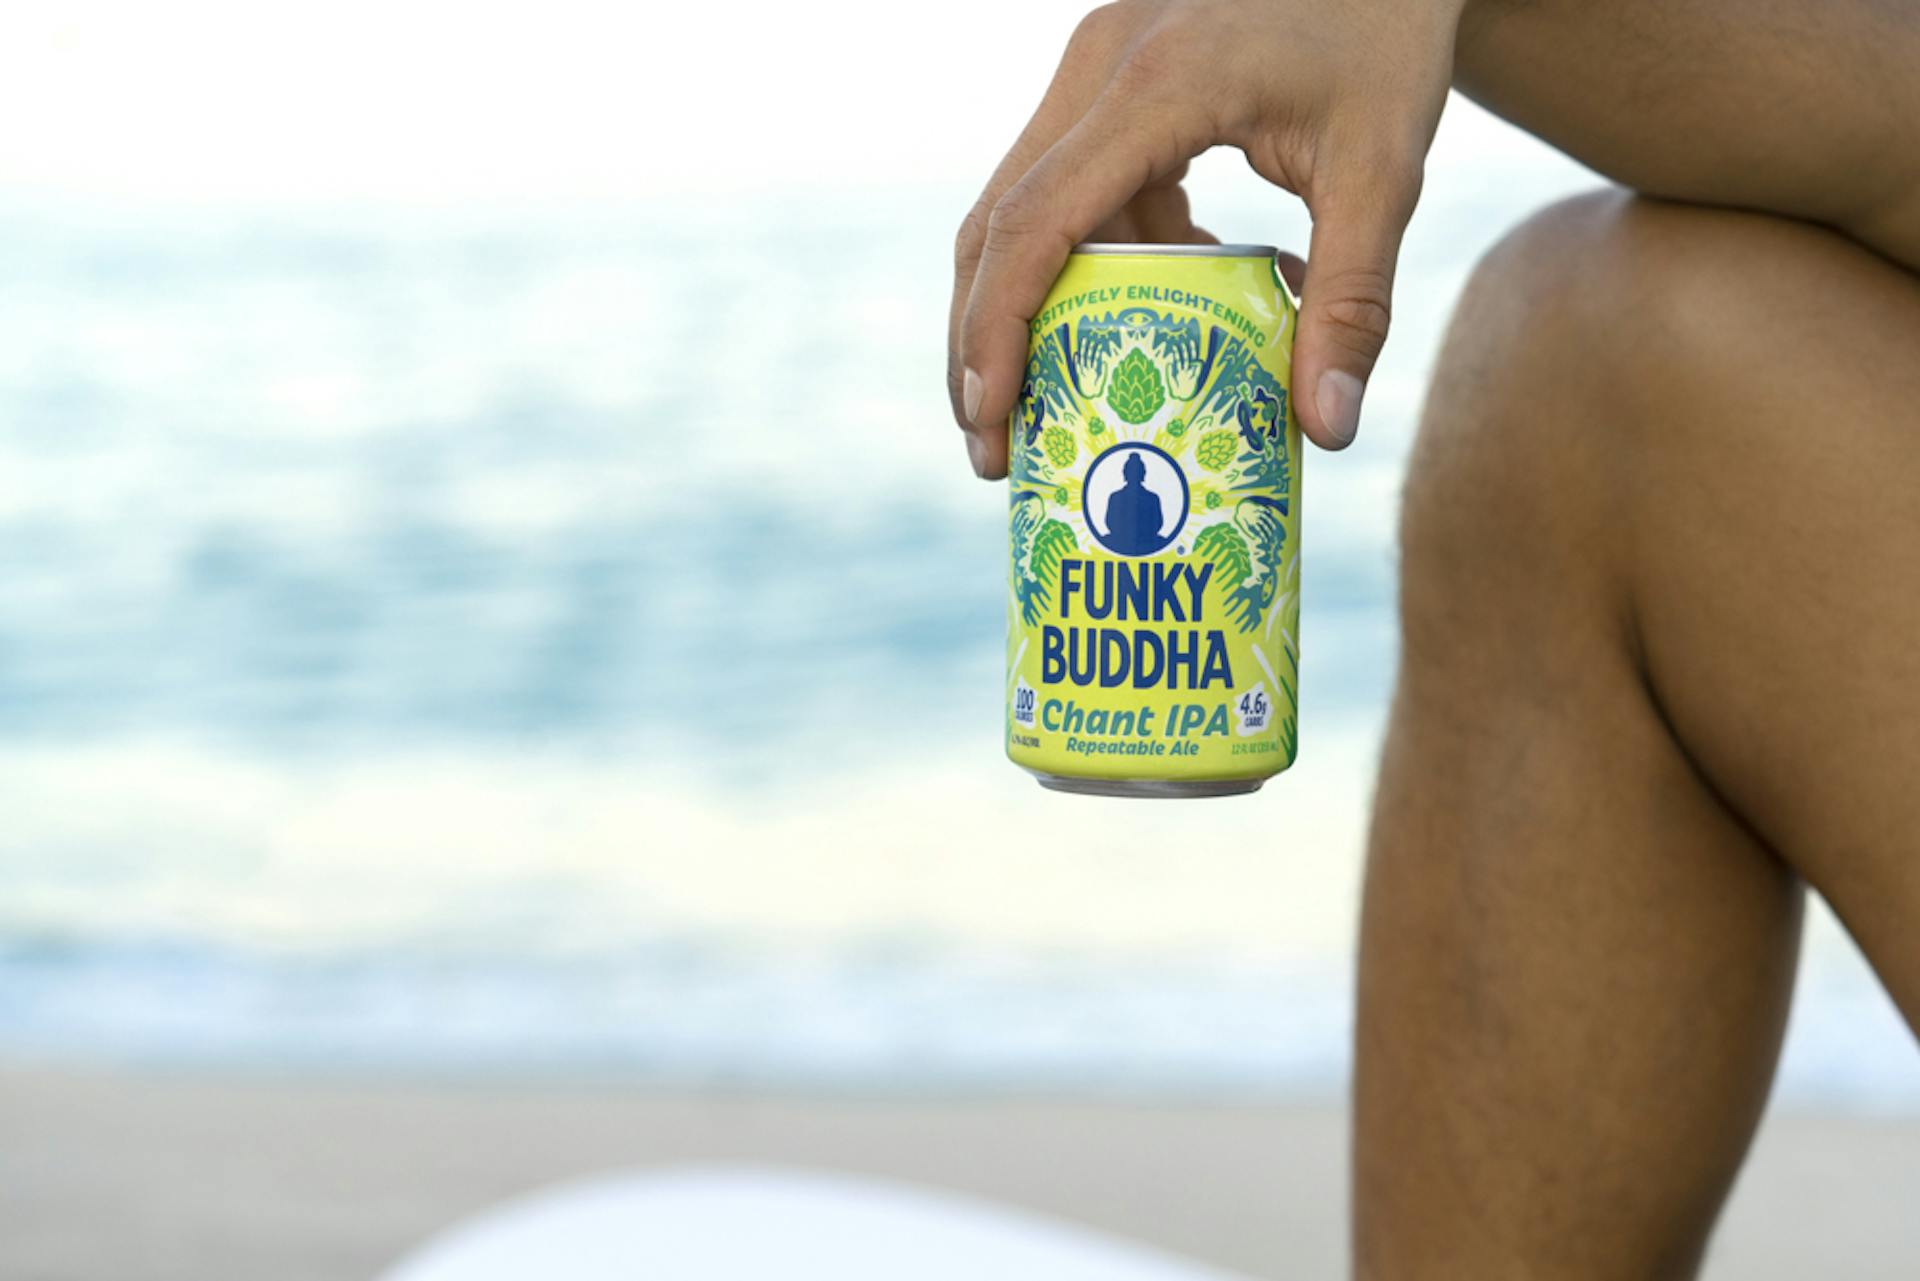 Drinking Funky Buddha beers on the beach